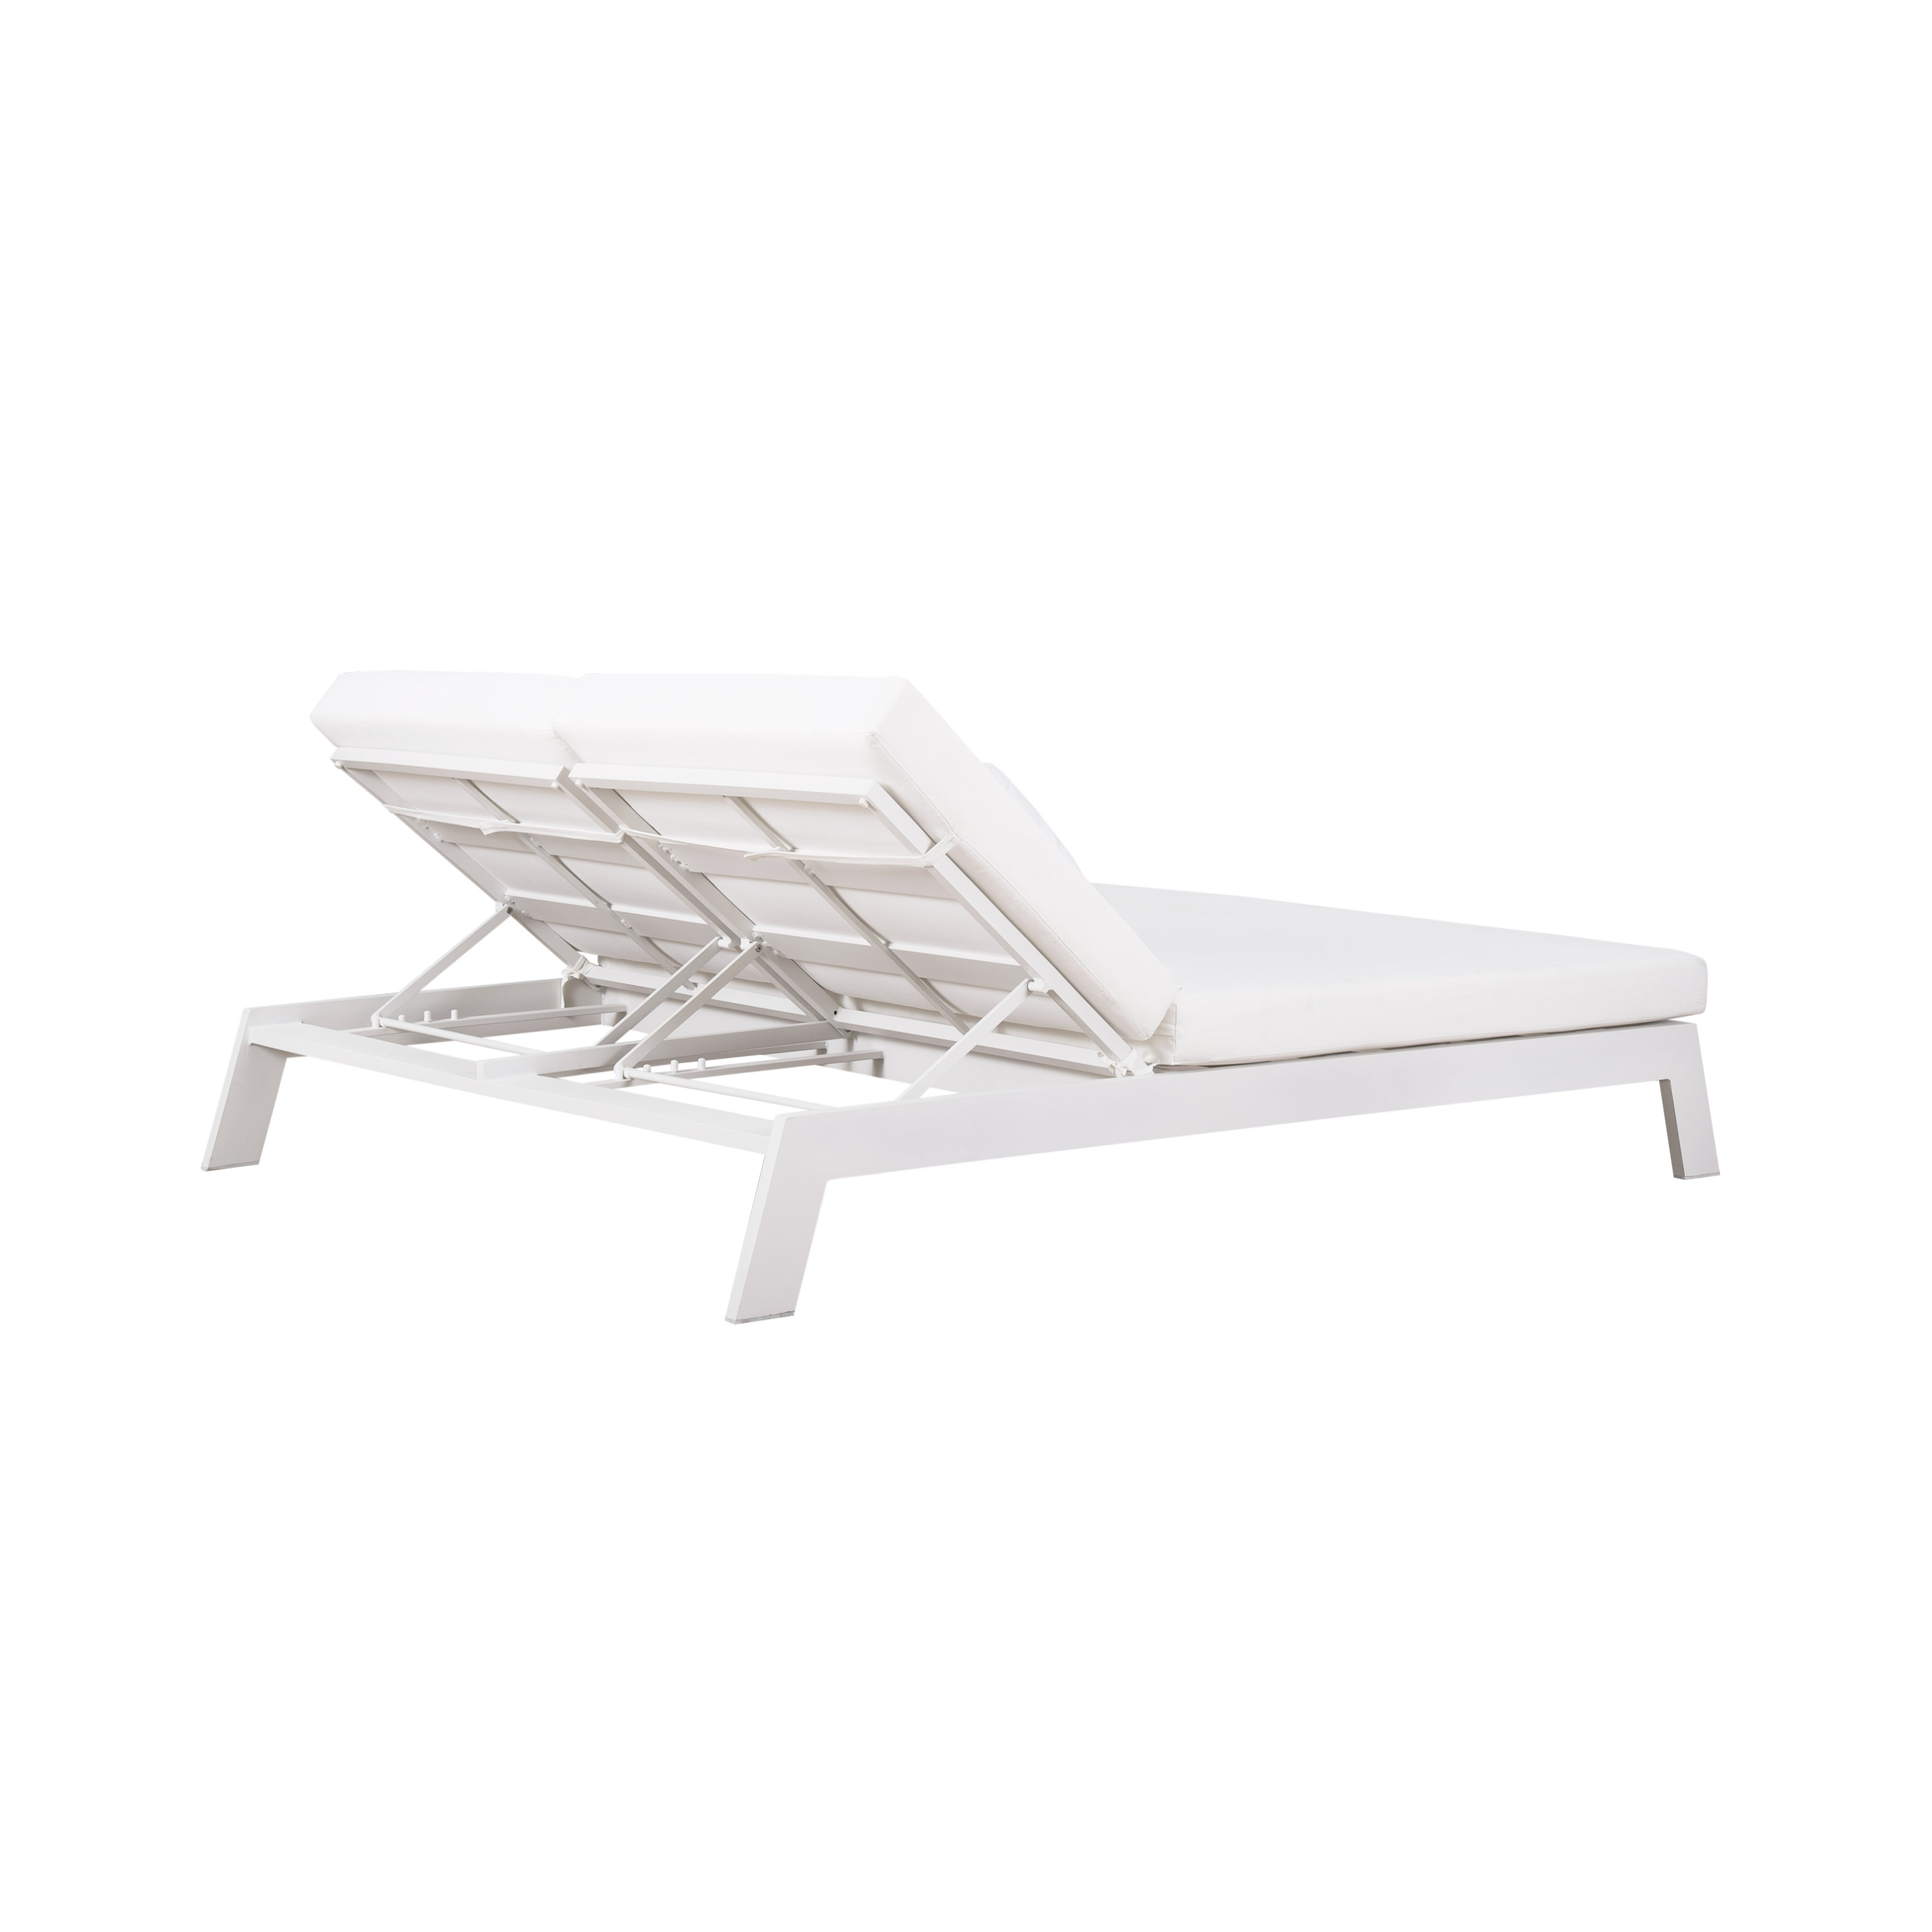 Casa alu. double daybed S5